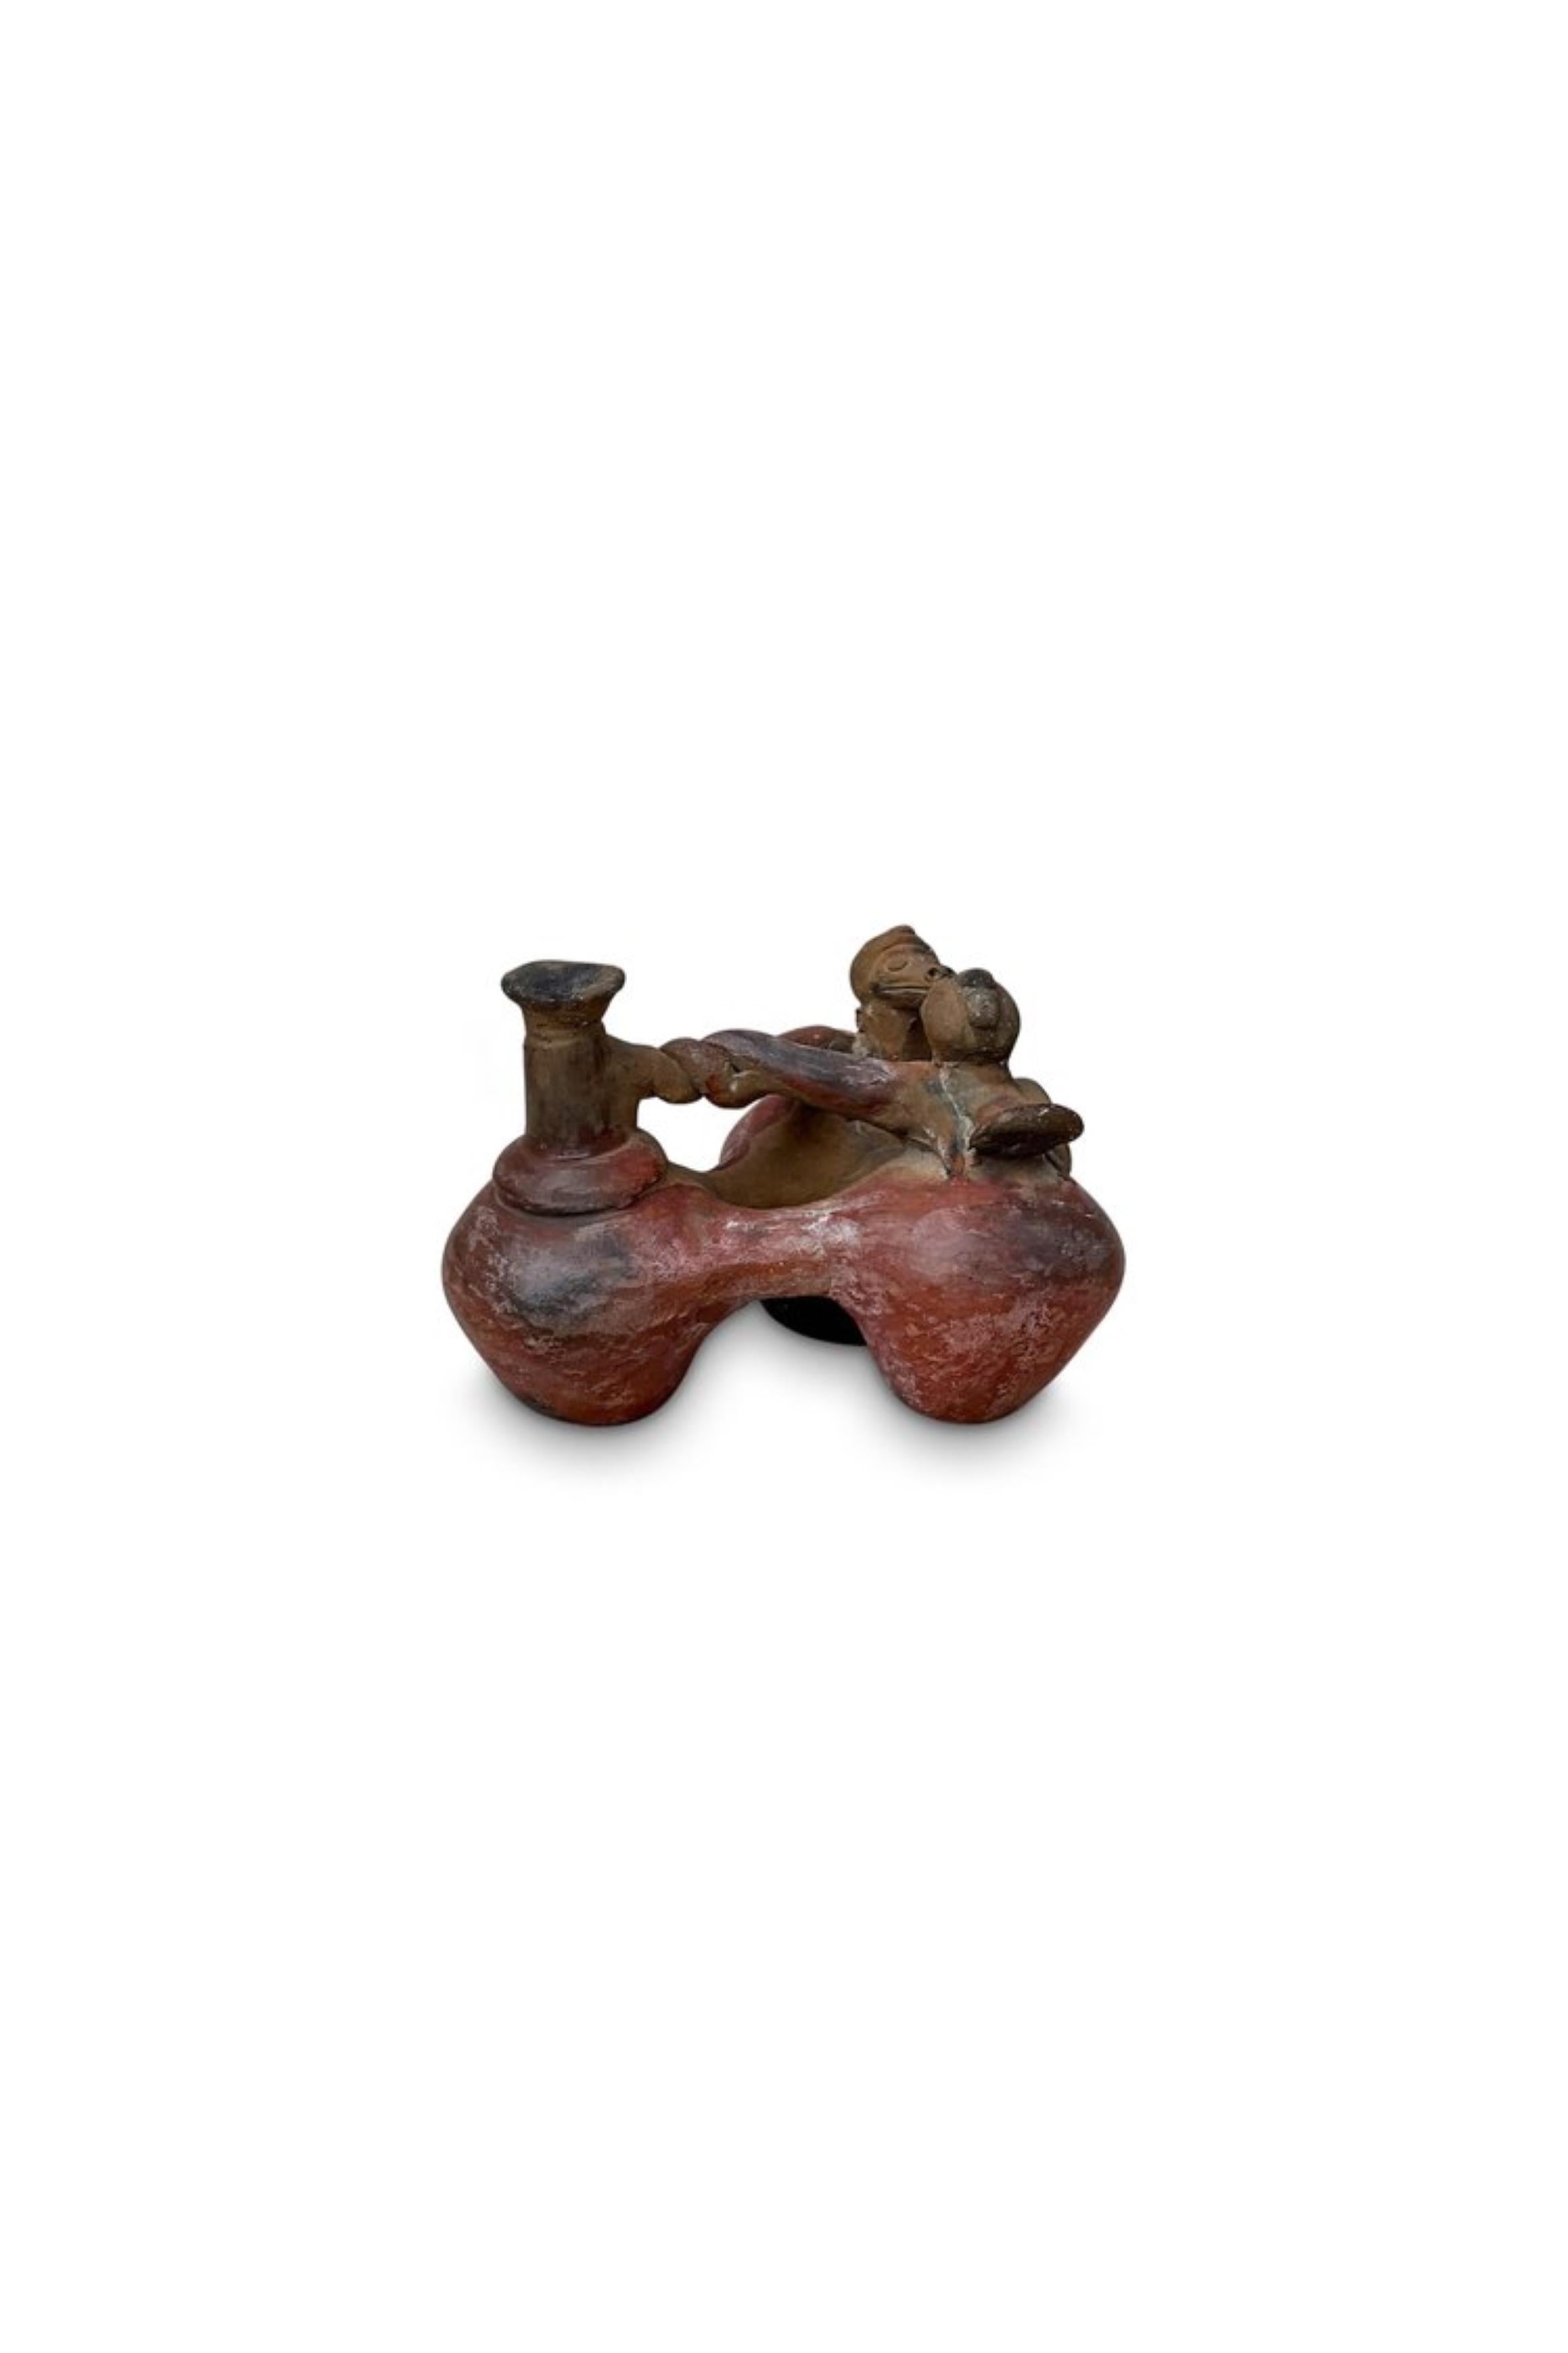 Pre-Columbian terracotta Chimu vessel pottery - explore the rich history of ancient artistry with this unique artifact as an enduring testament to the artistic value of the ancient Chimu civilization of Peru.

Measurements: 6” L x 7” W x 4.75”